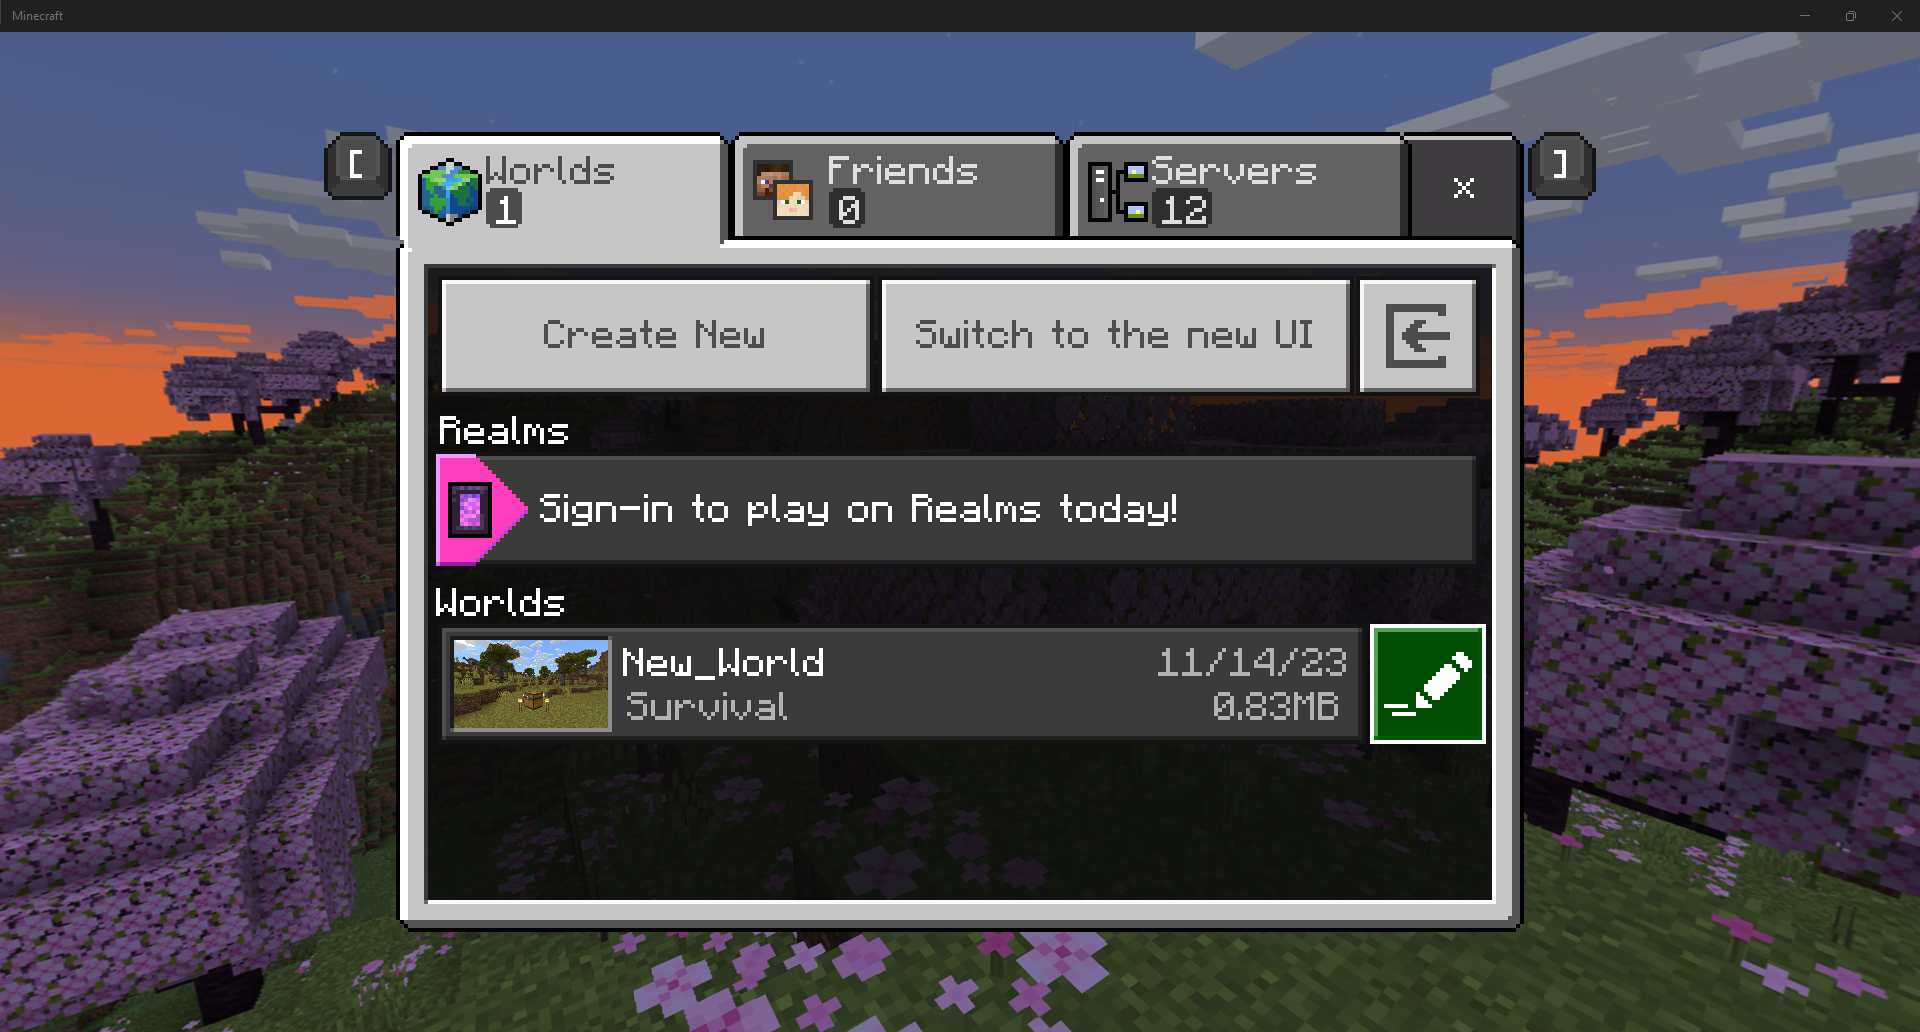 Minecraft UI with list of worlds displayed. New_World is the only one on the list.